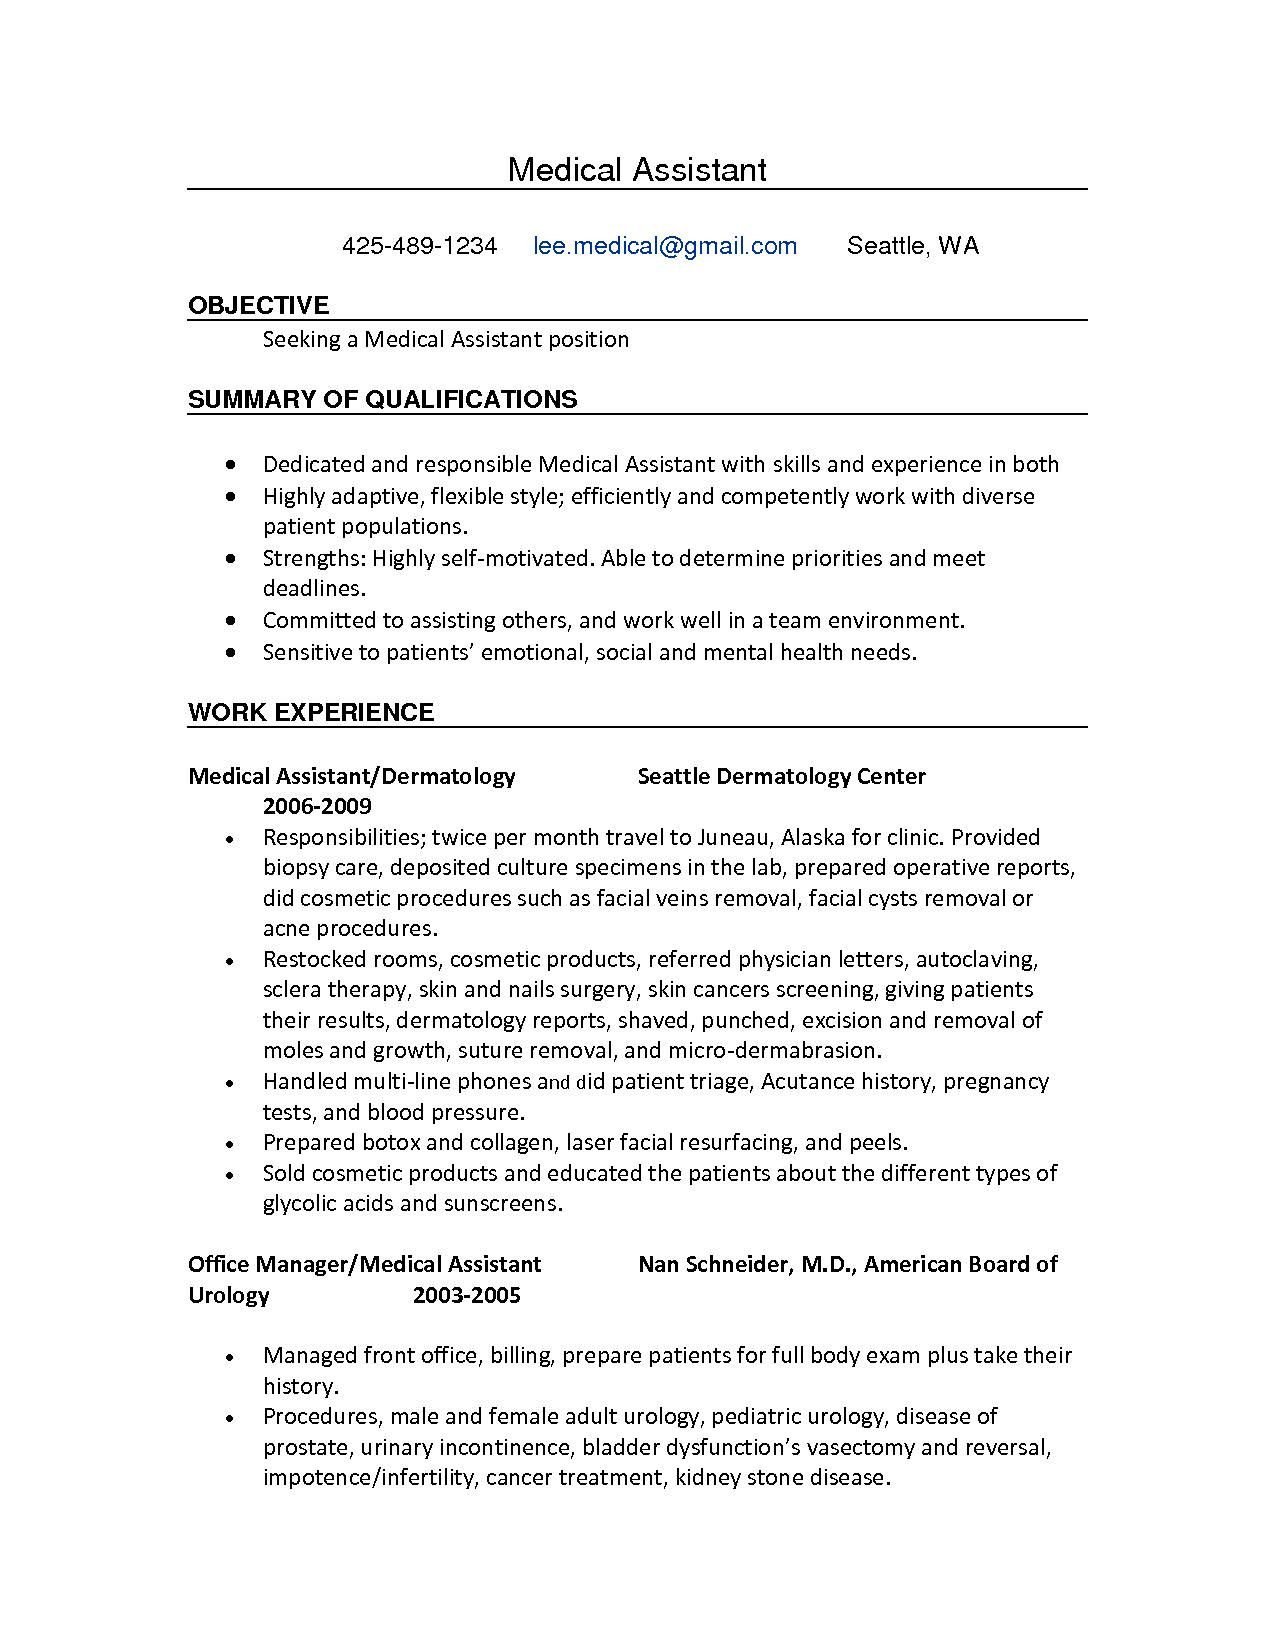 Medical assistant Resume Templates Resume Templates